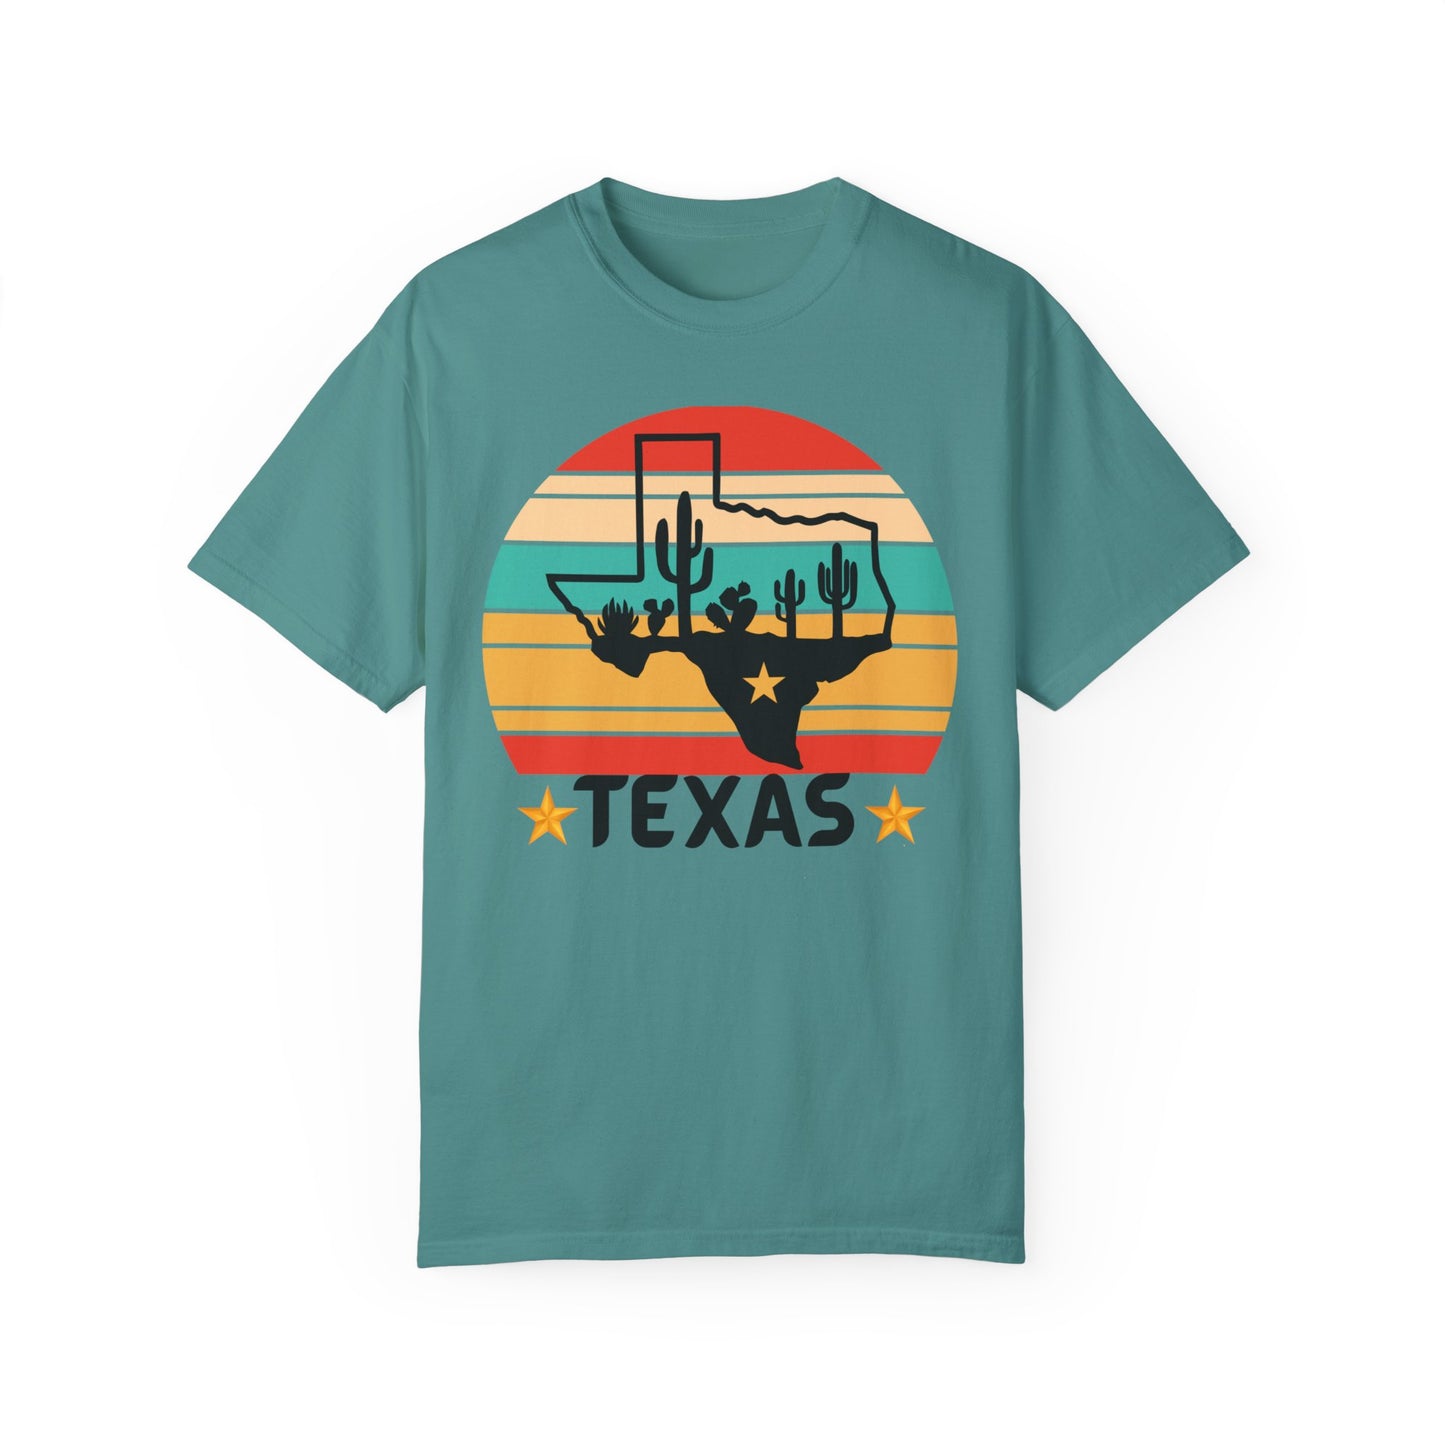 Texas Colorful T-Shirt, Texas Sunset T-Shirt For Women, Western T-Shirt, Texas Shirt, Texas Sunset Shirt, Gifts For Her, Gifts For Mom